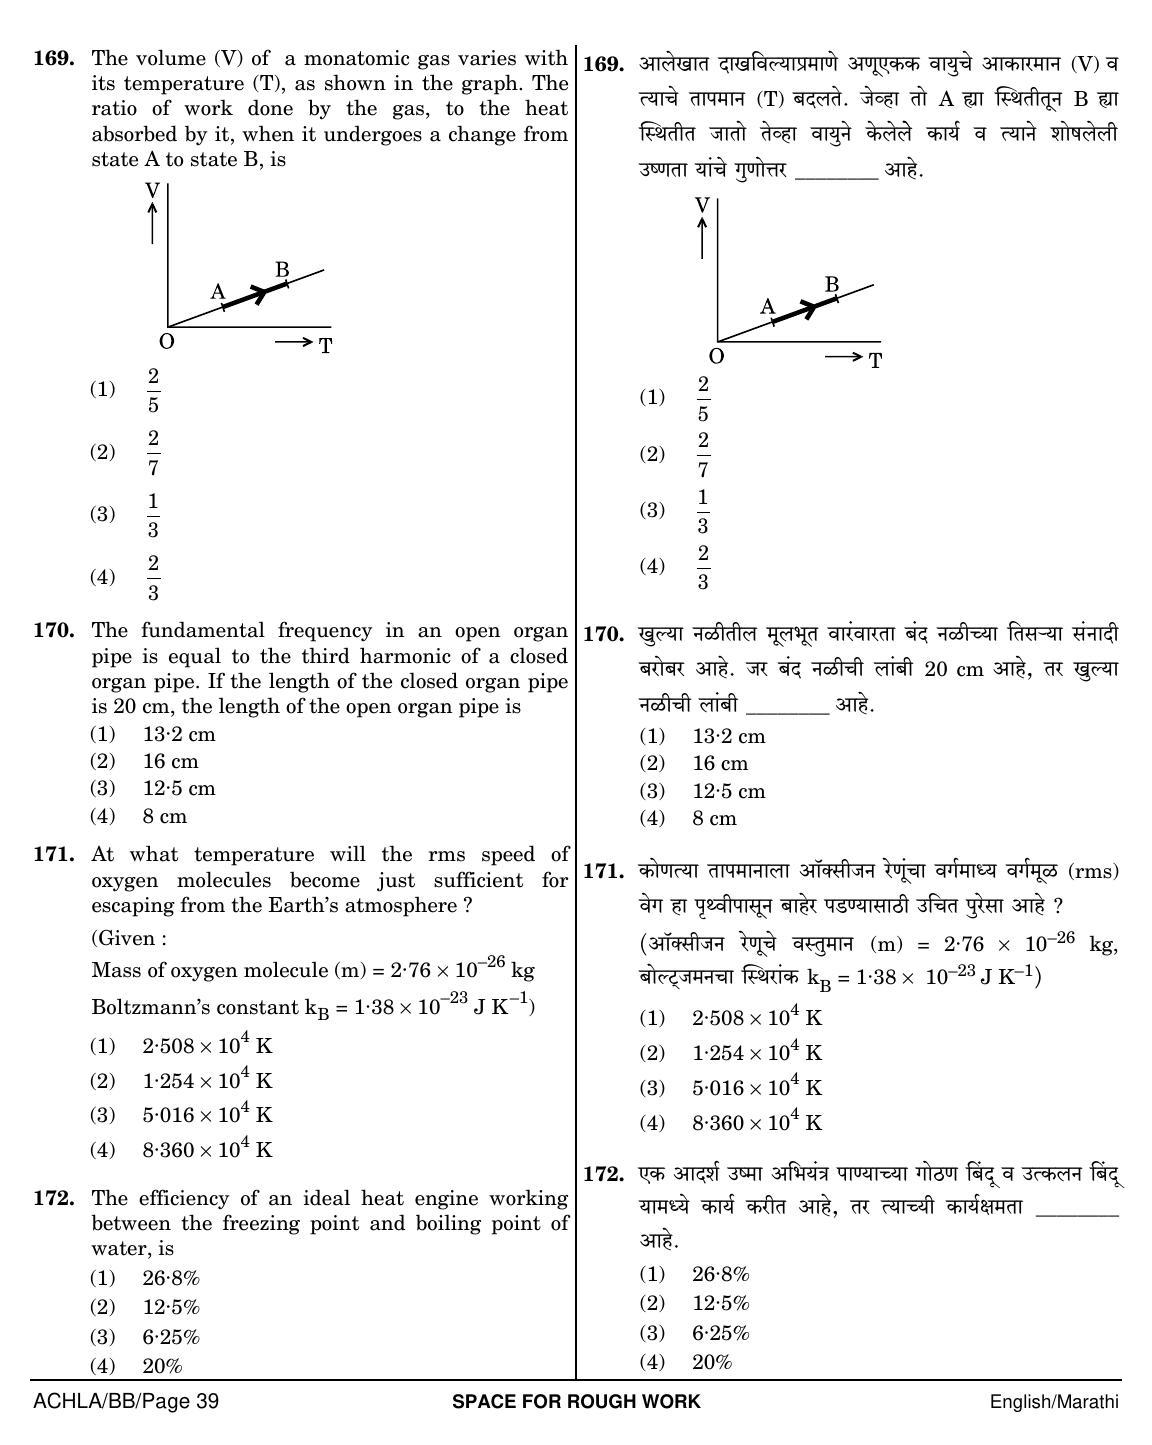 NEET Marathi BB 2018 Question Paper - Page 39